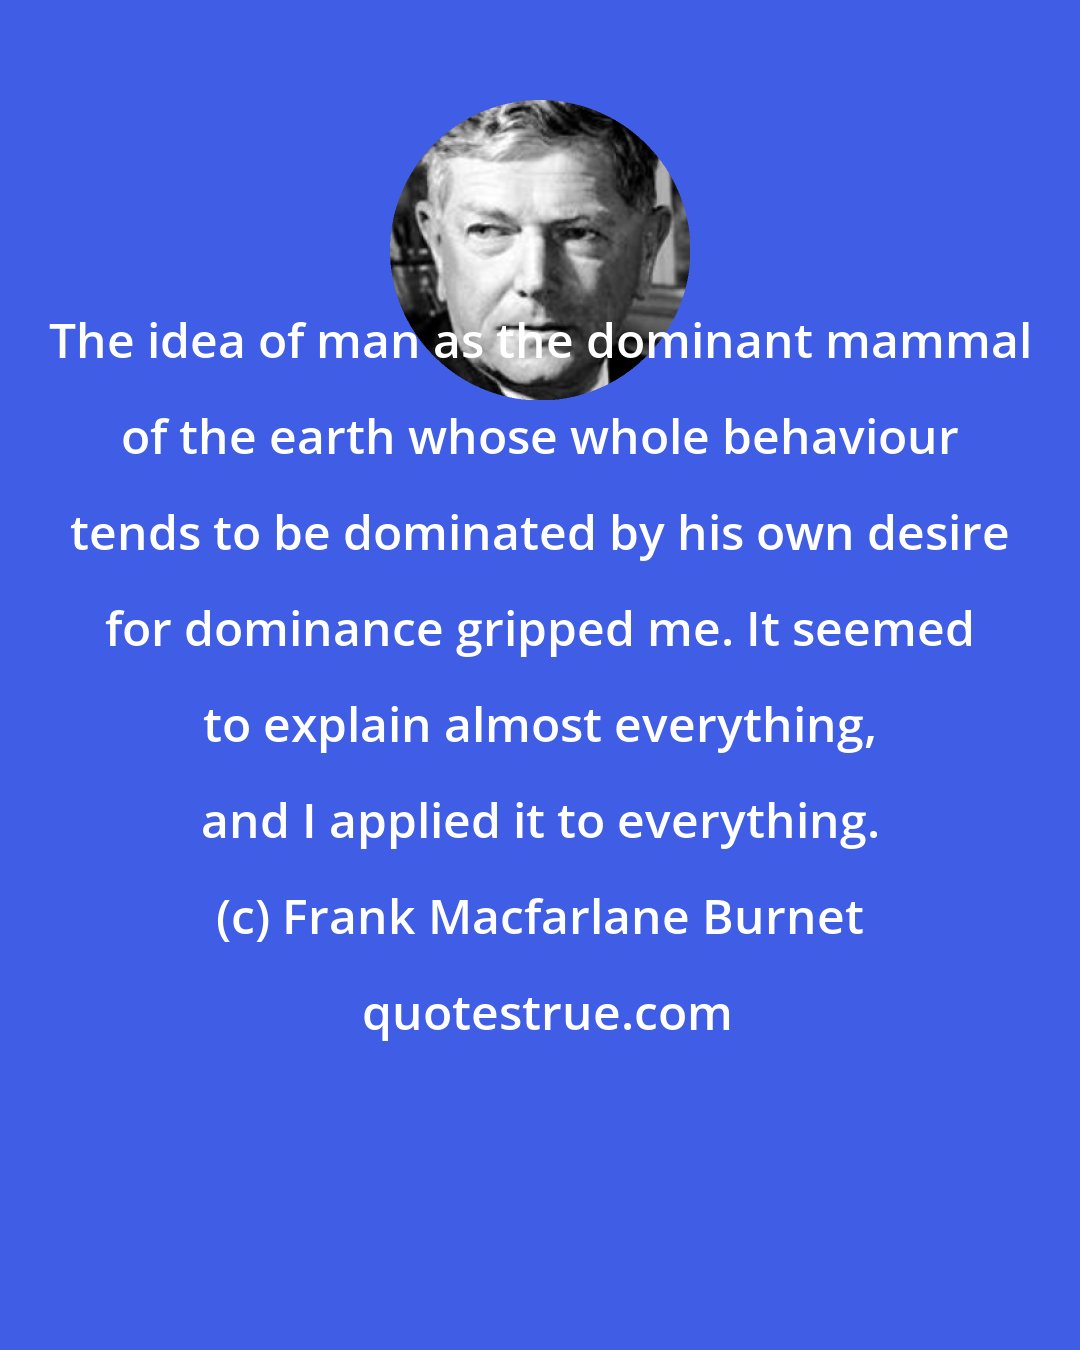 Frank Macfarlane Burnet: The idea of man as the dominant mammal of the earth whose whole behaviour tends to be dominated by his own desire for dominance gripped me. It seemed to explain almost everything, and I applied it to everything.